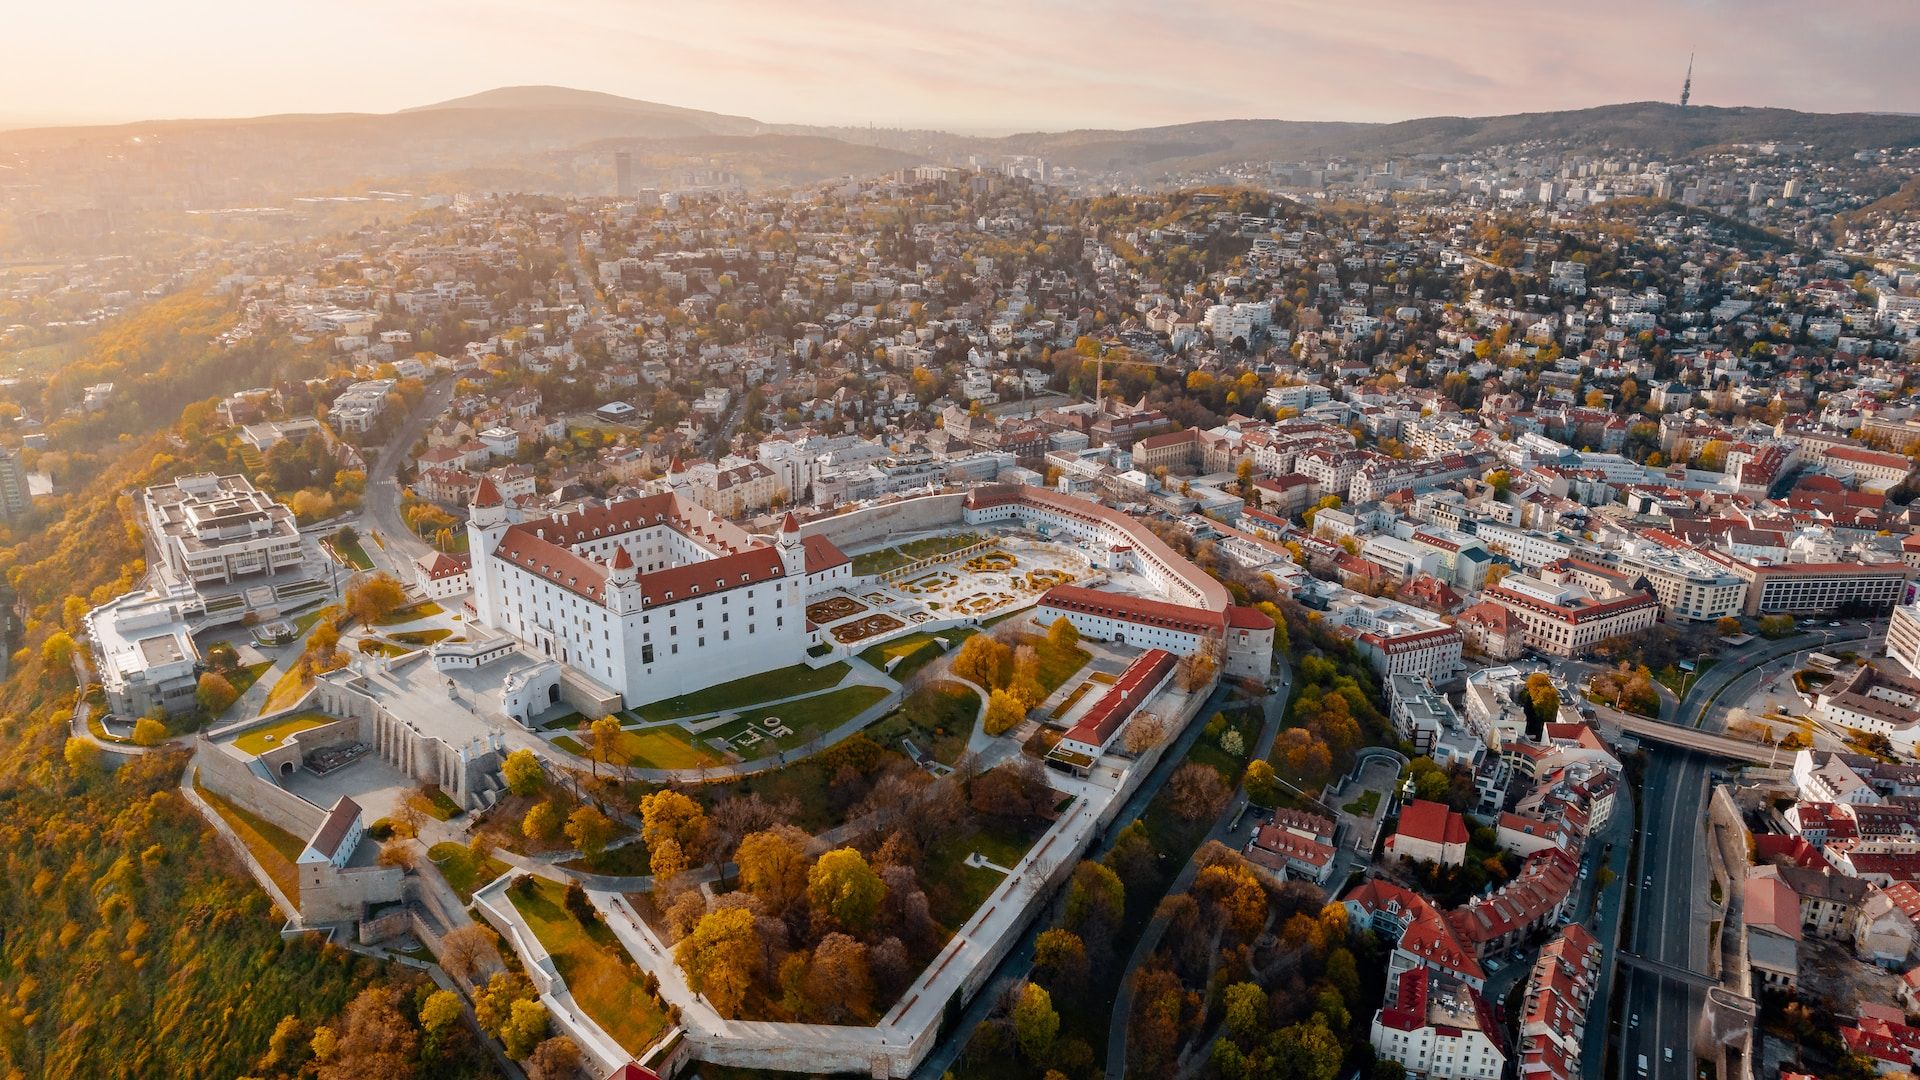 Bratislava Castle and other buildings in Slovakia, one of the world's youngest countries